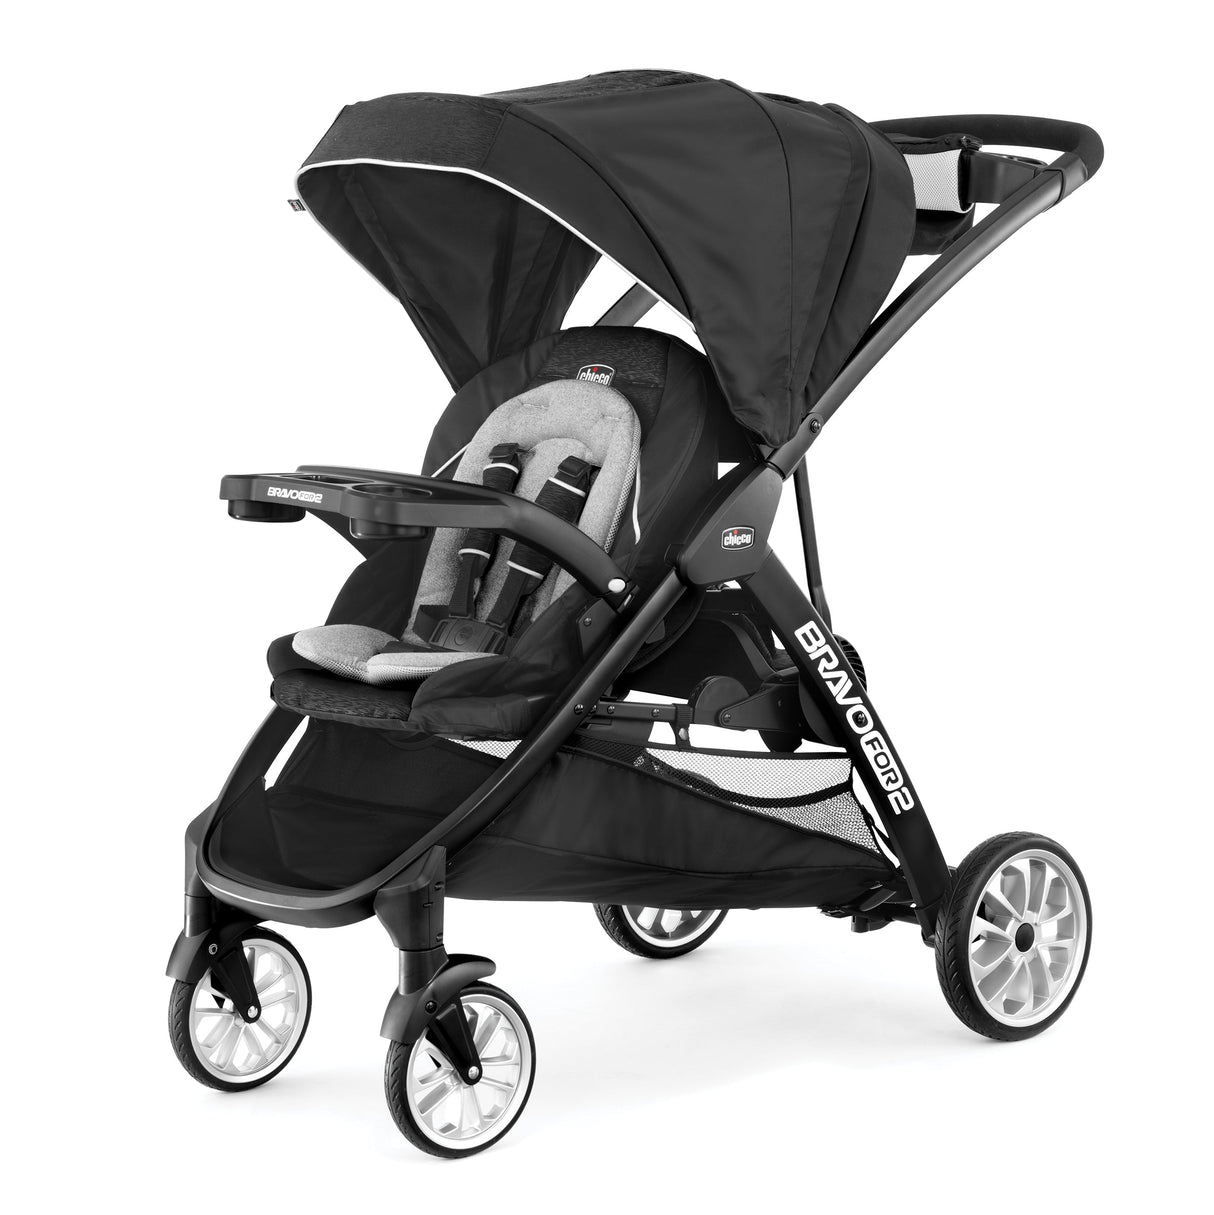 BravoFor2 LE Standing/Sitting Double Stroller in Crux Travel System by MamasUncut Store